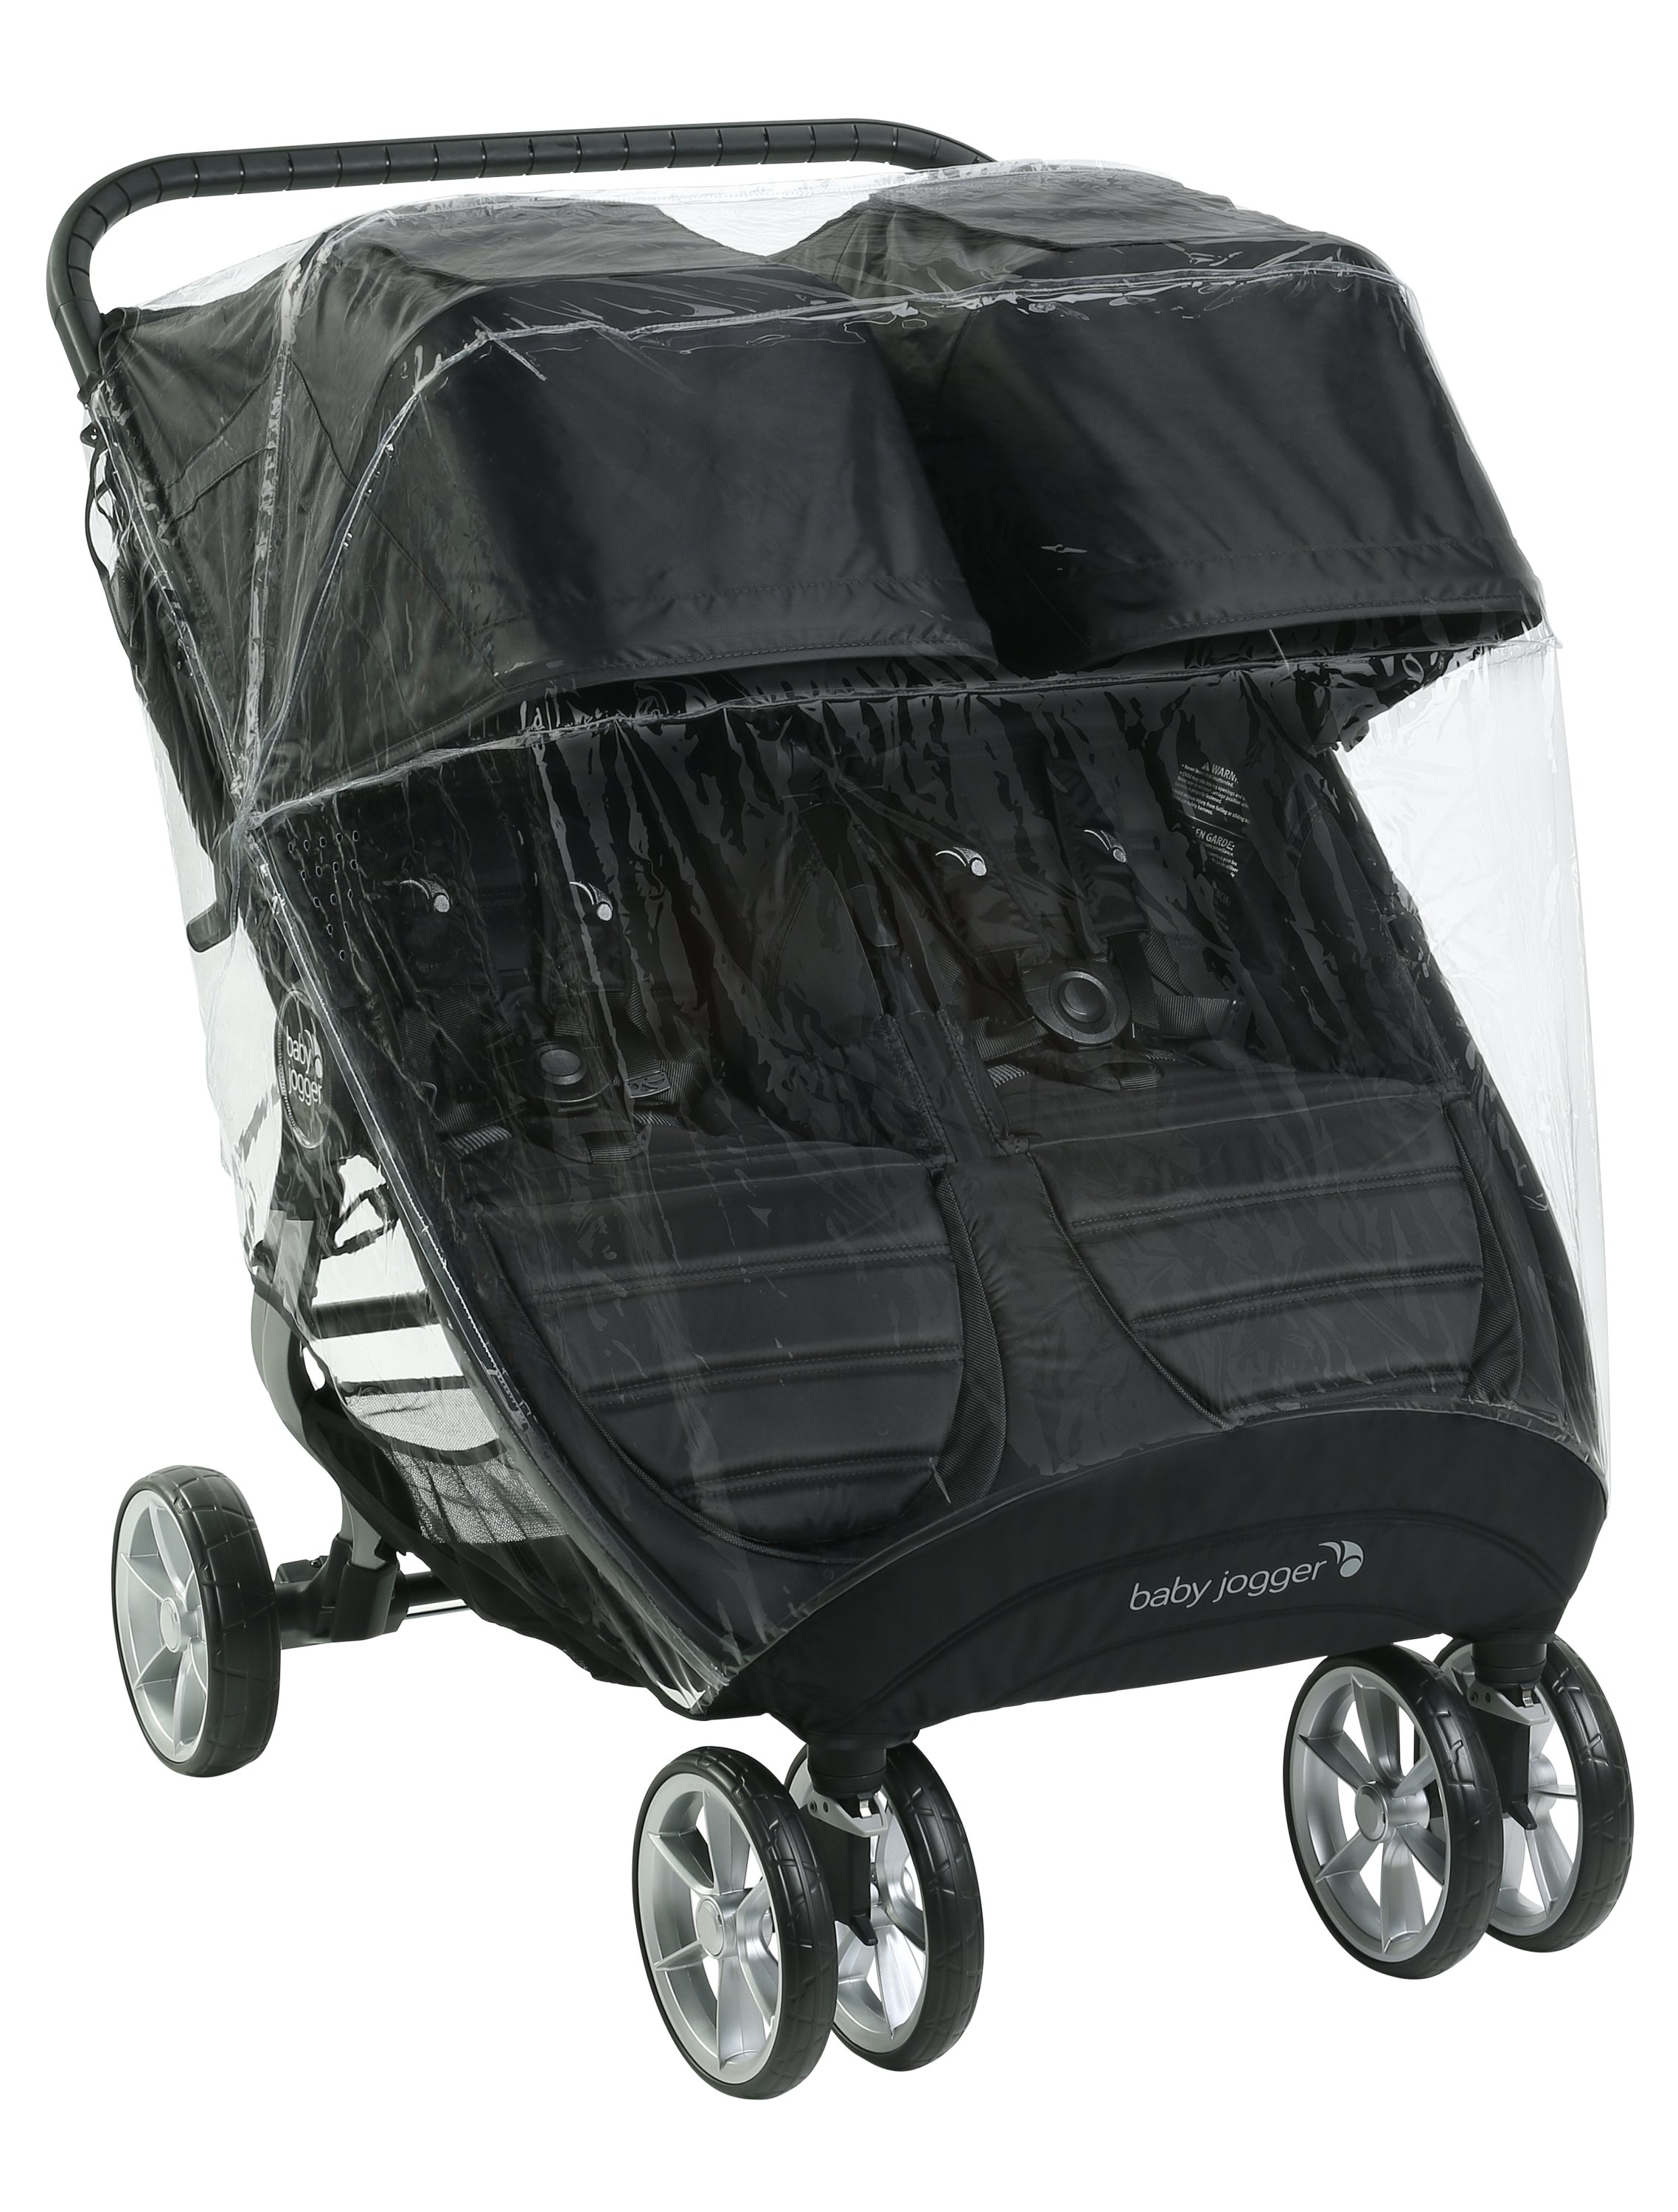 Baby Jogger shield city mini® 2 double and city mini® GT2 double strollers | Baby Jogger